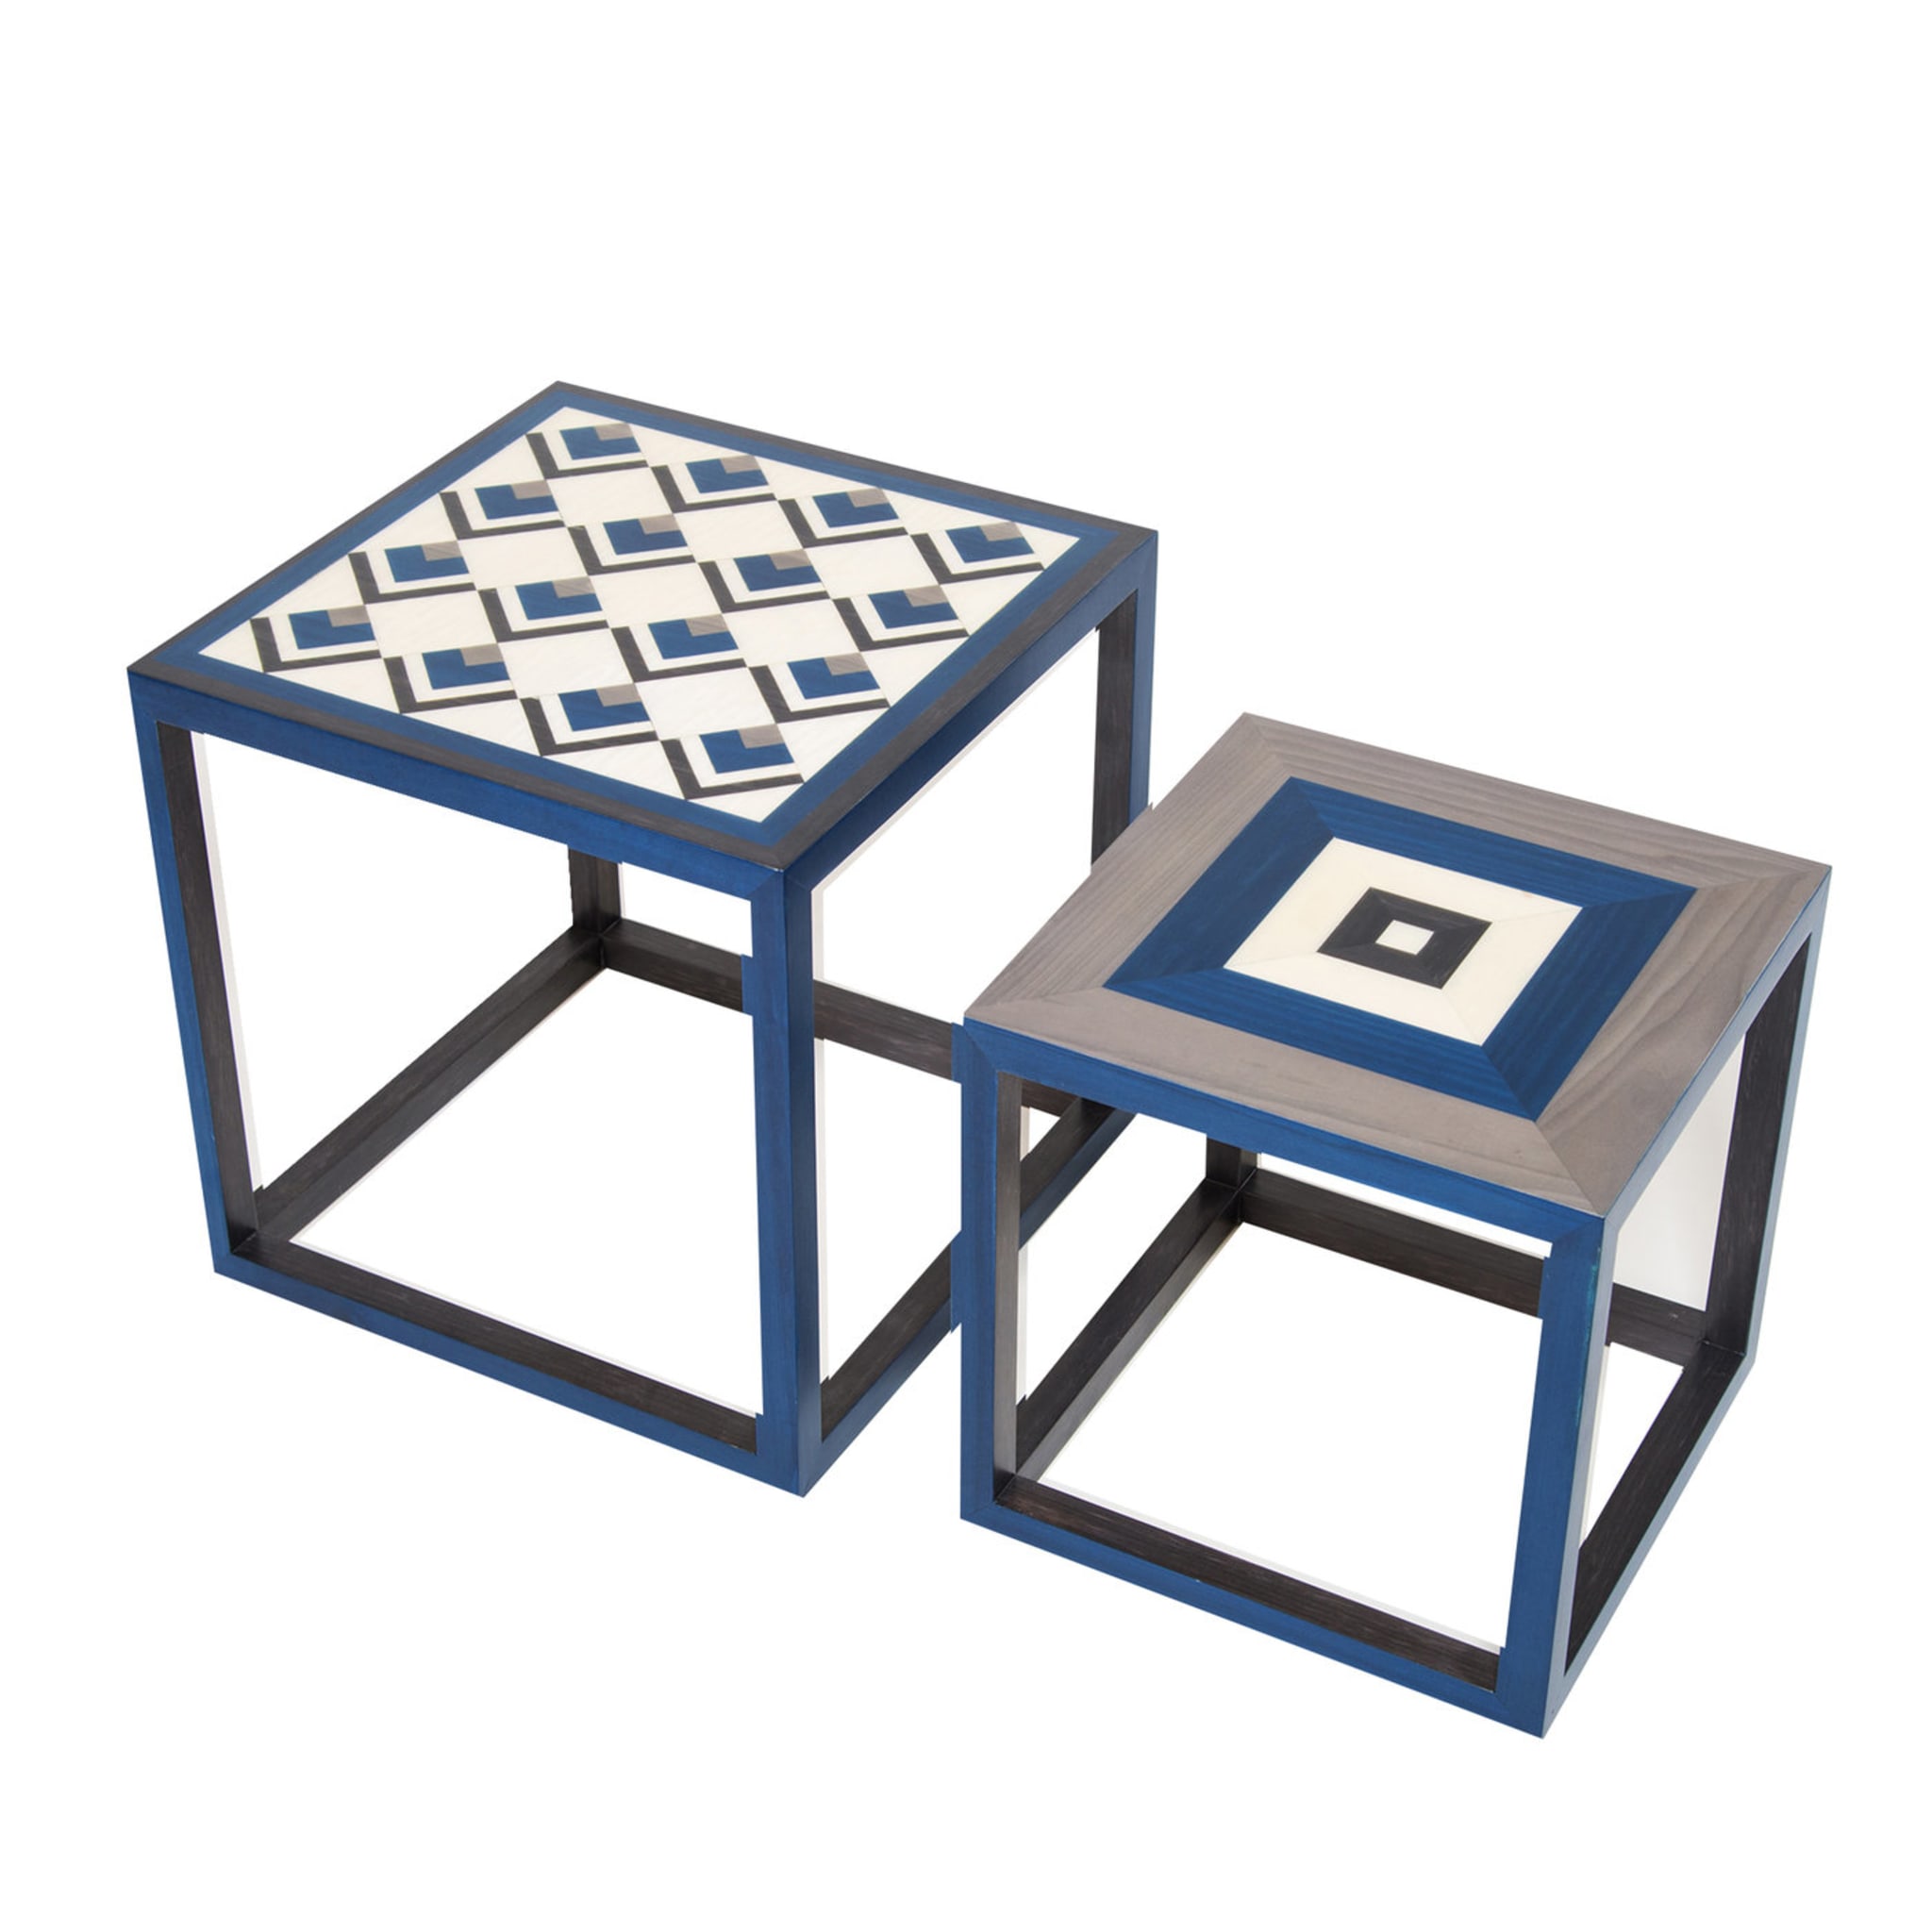 Partenope Blue Squares Set of 2 Nesting Tables - Main view